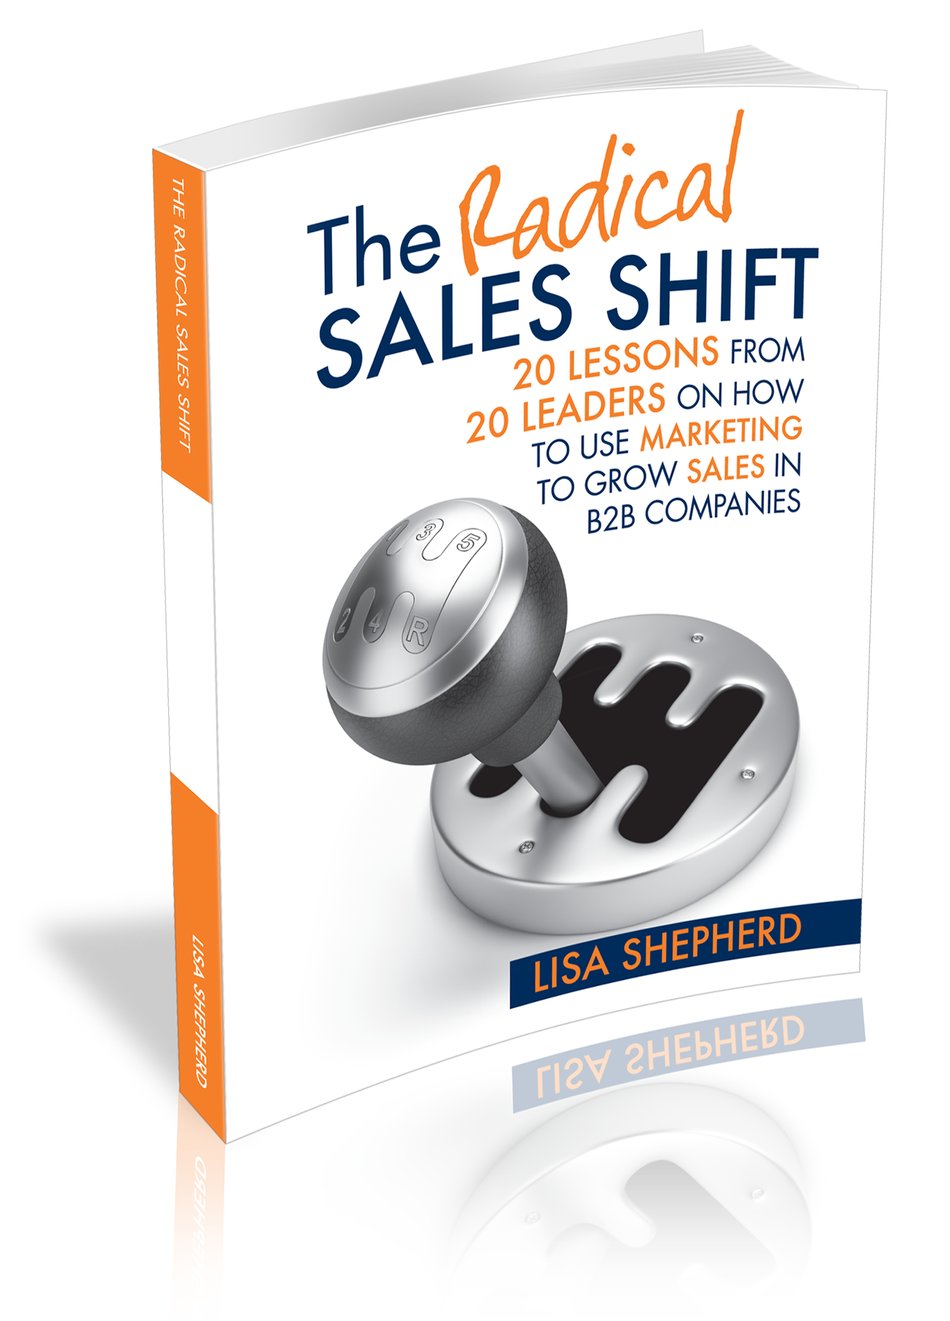 Is Your Company Ready for The Radical Sales Shift? 